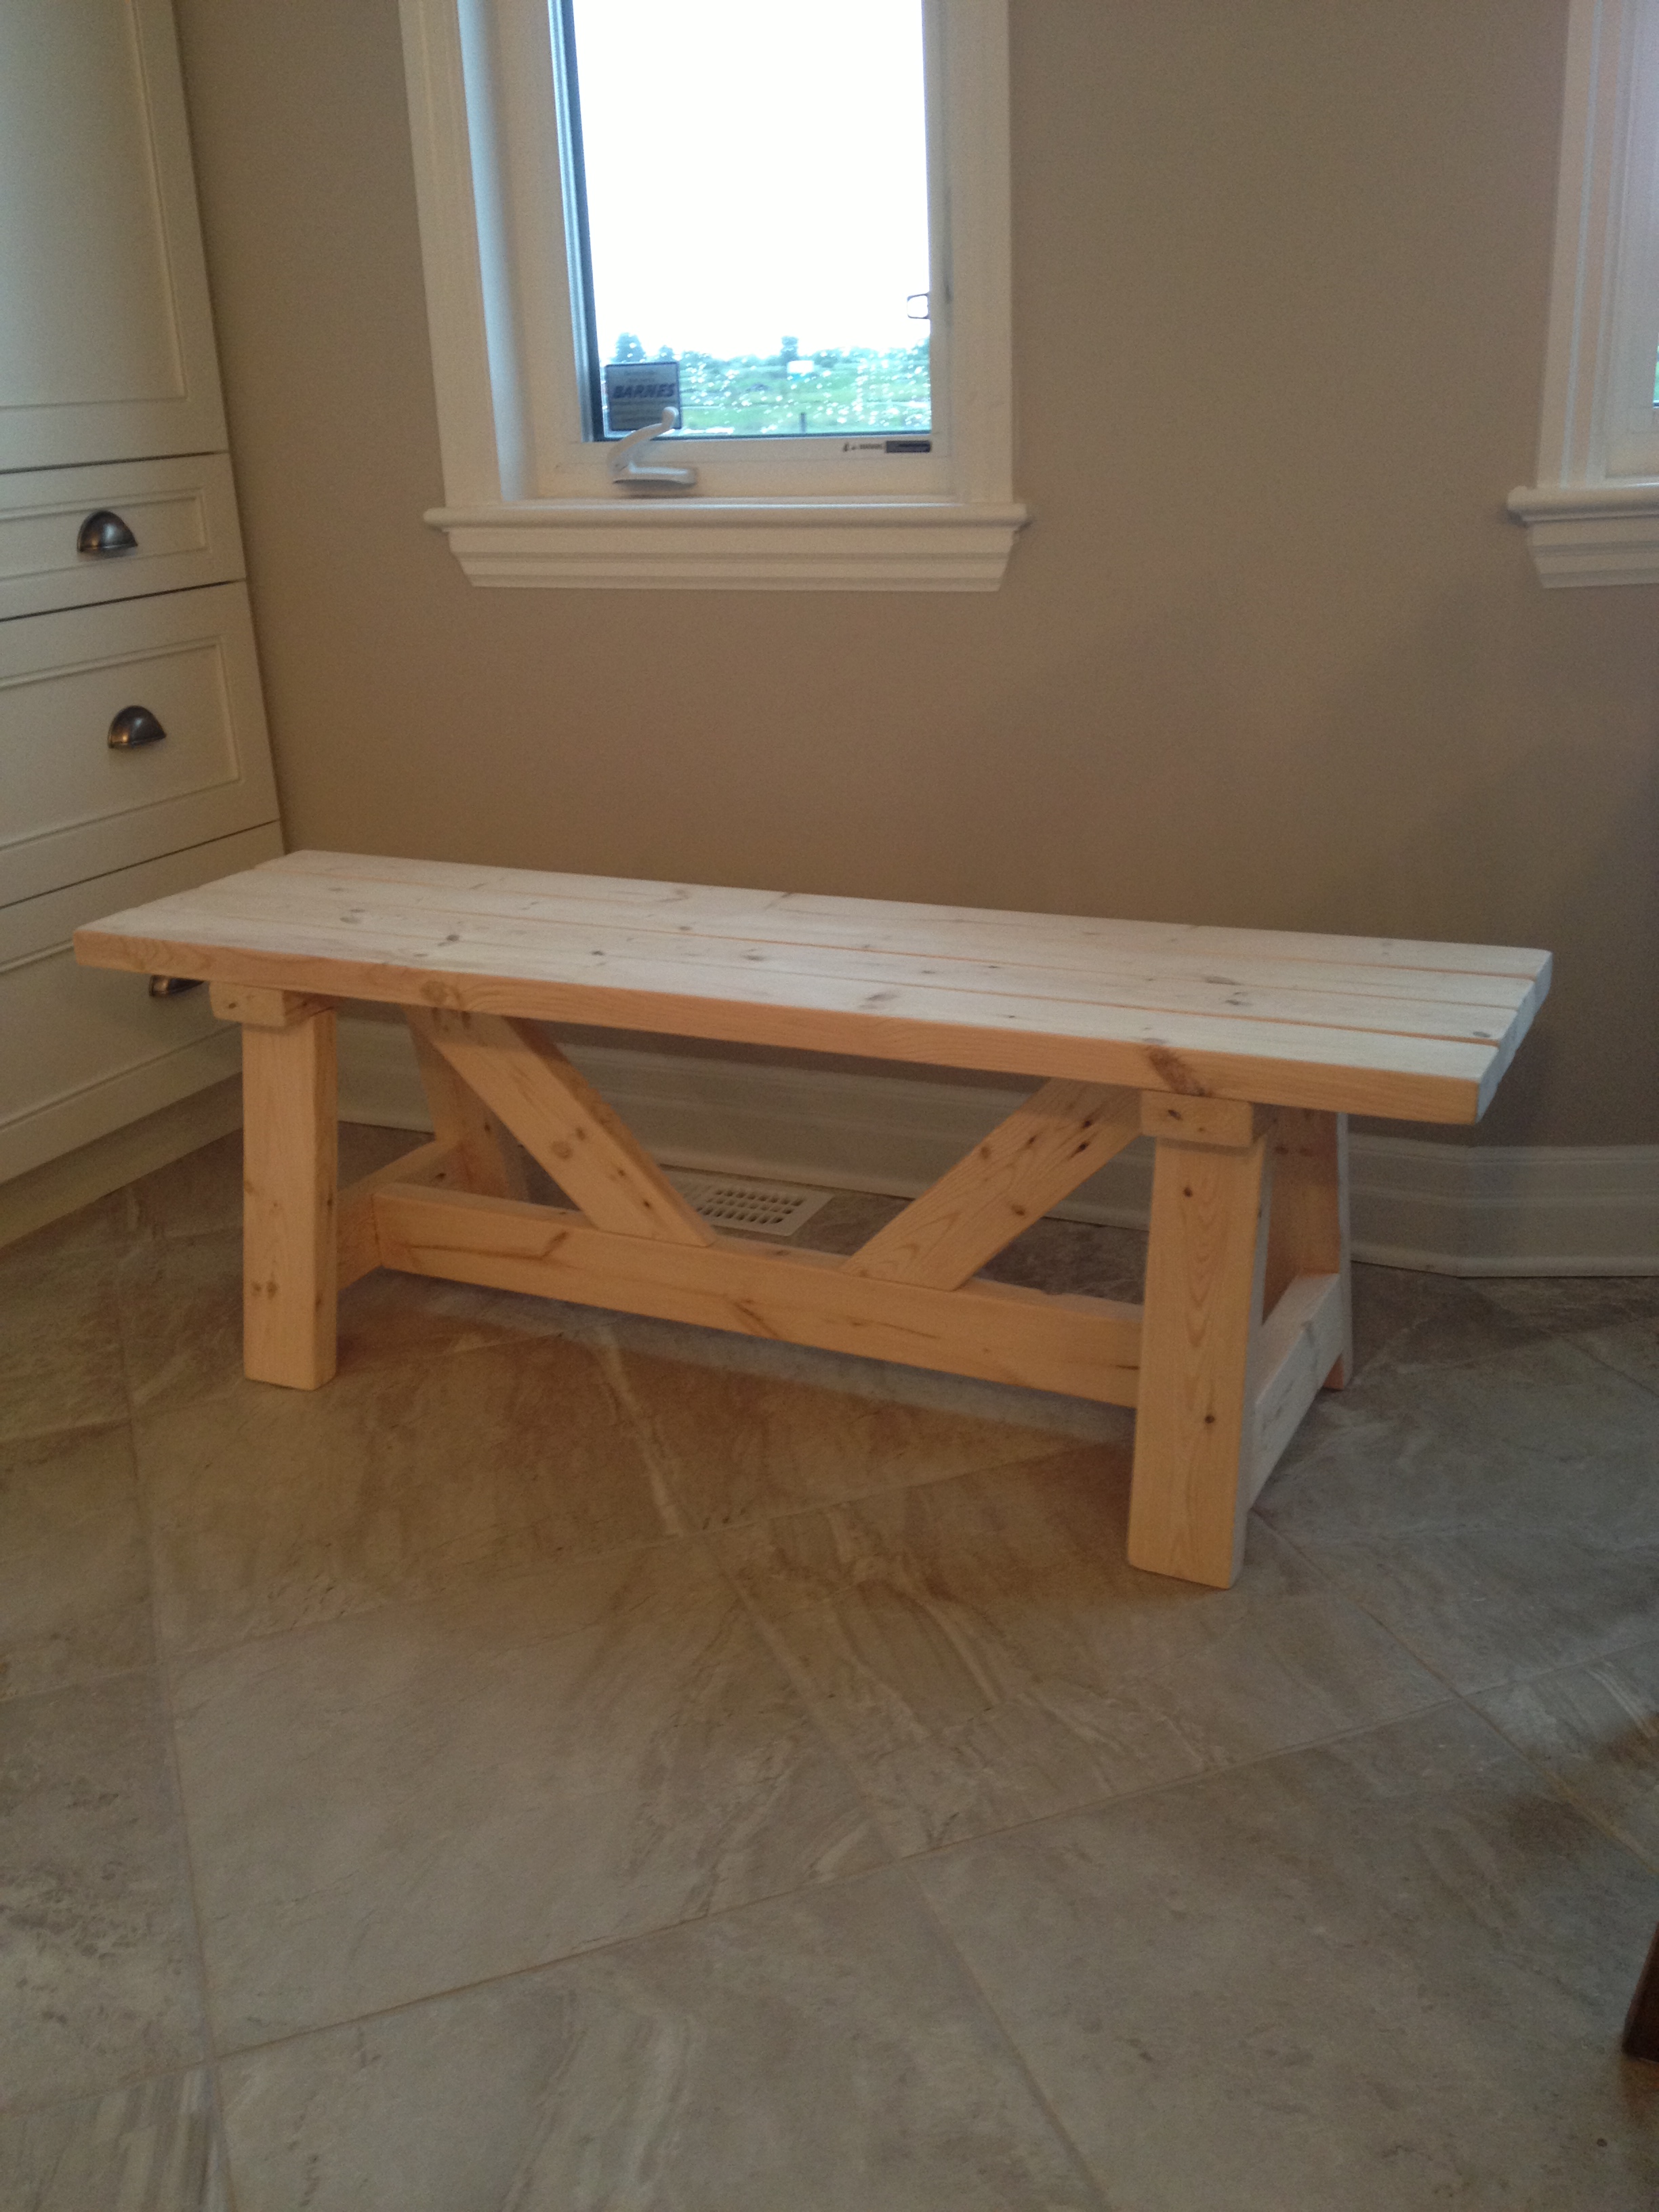 Ana White Farmhouse Bench in 1 day - DIY Projects